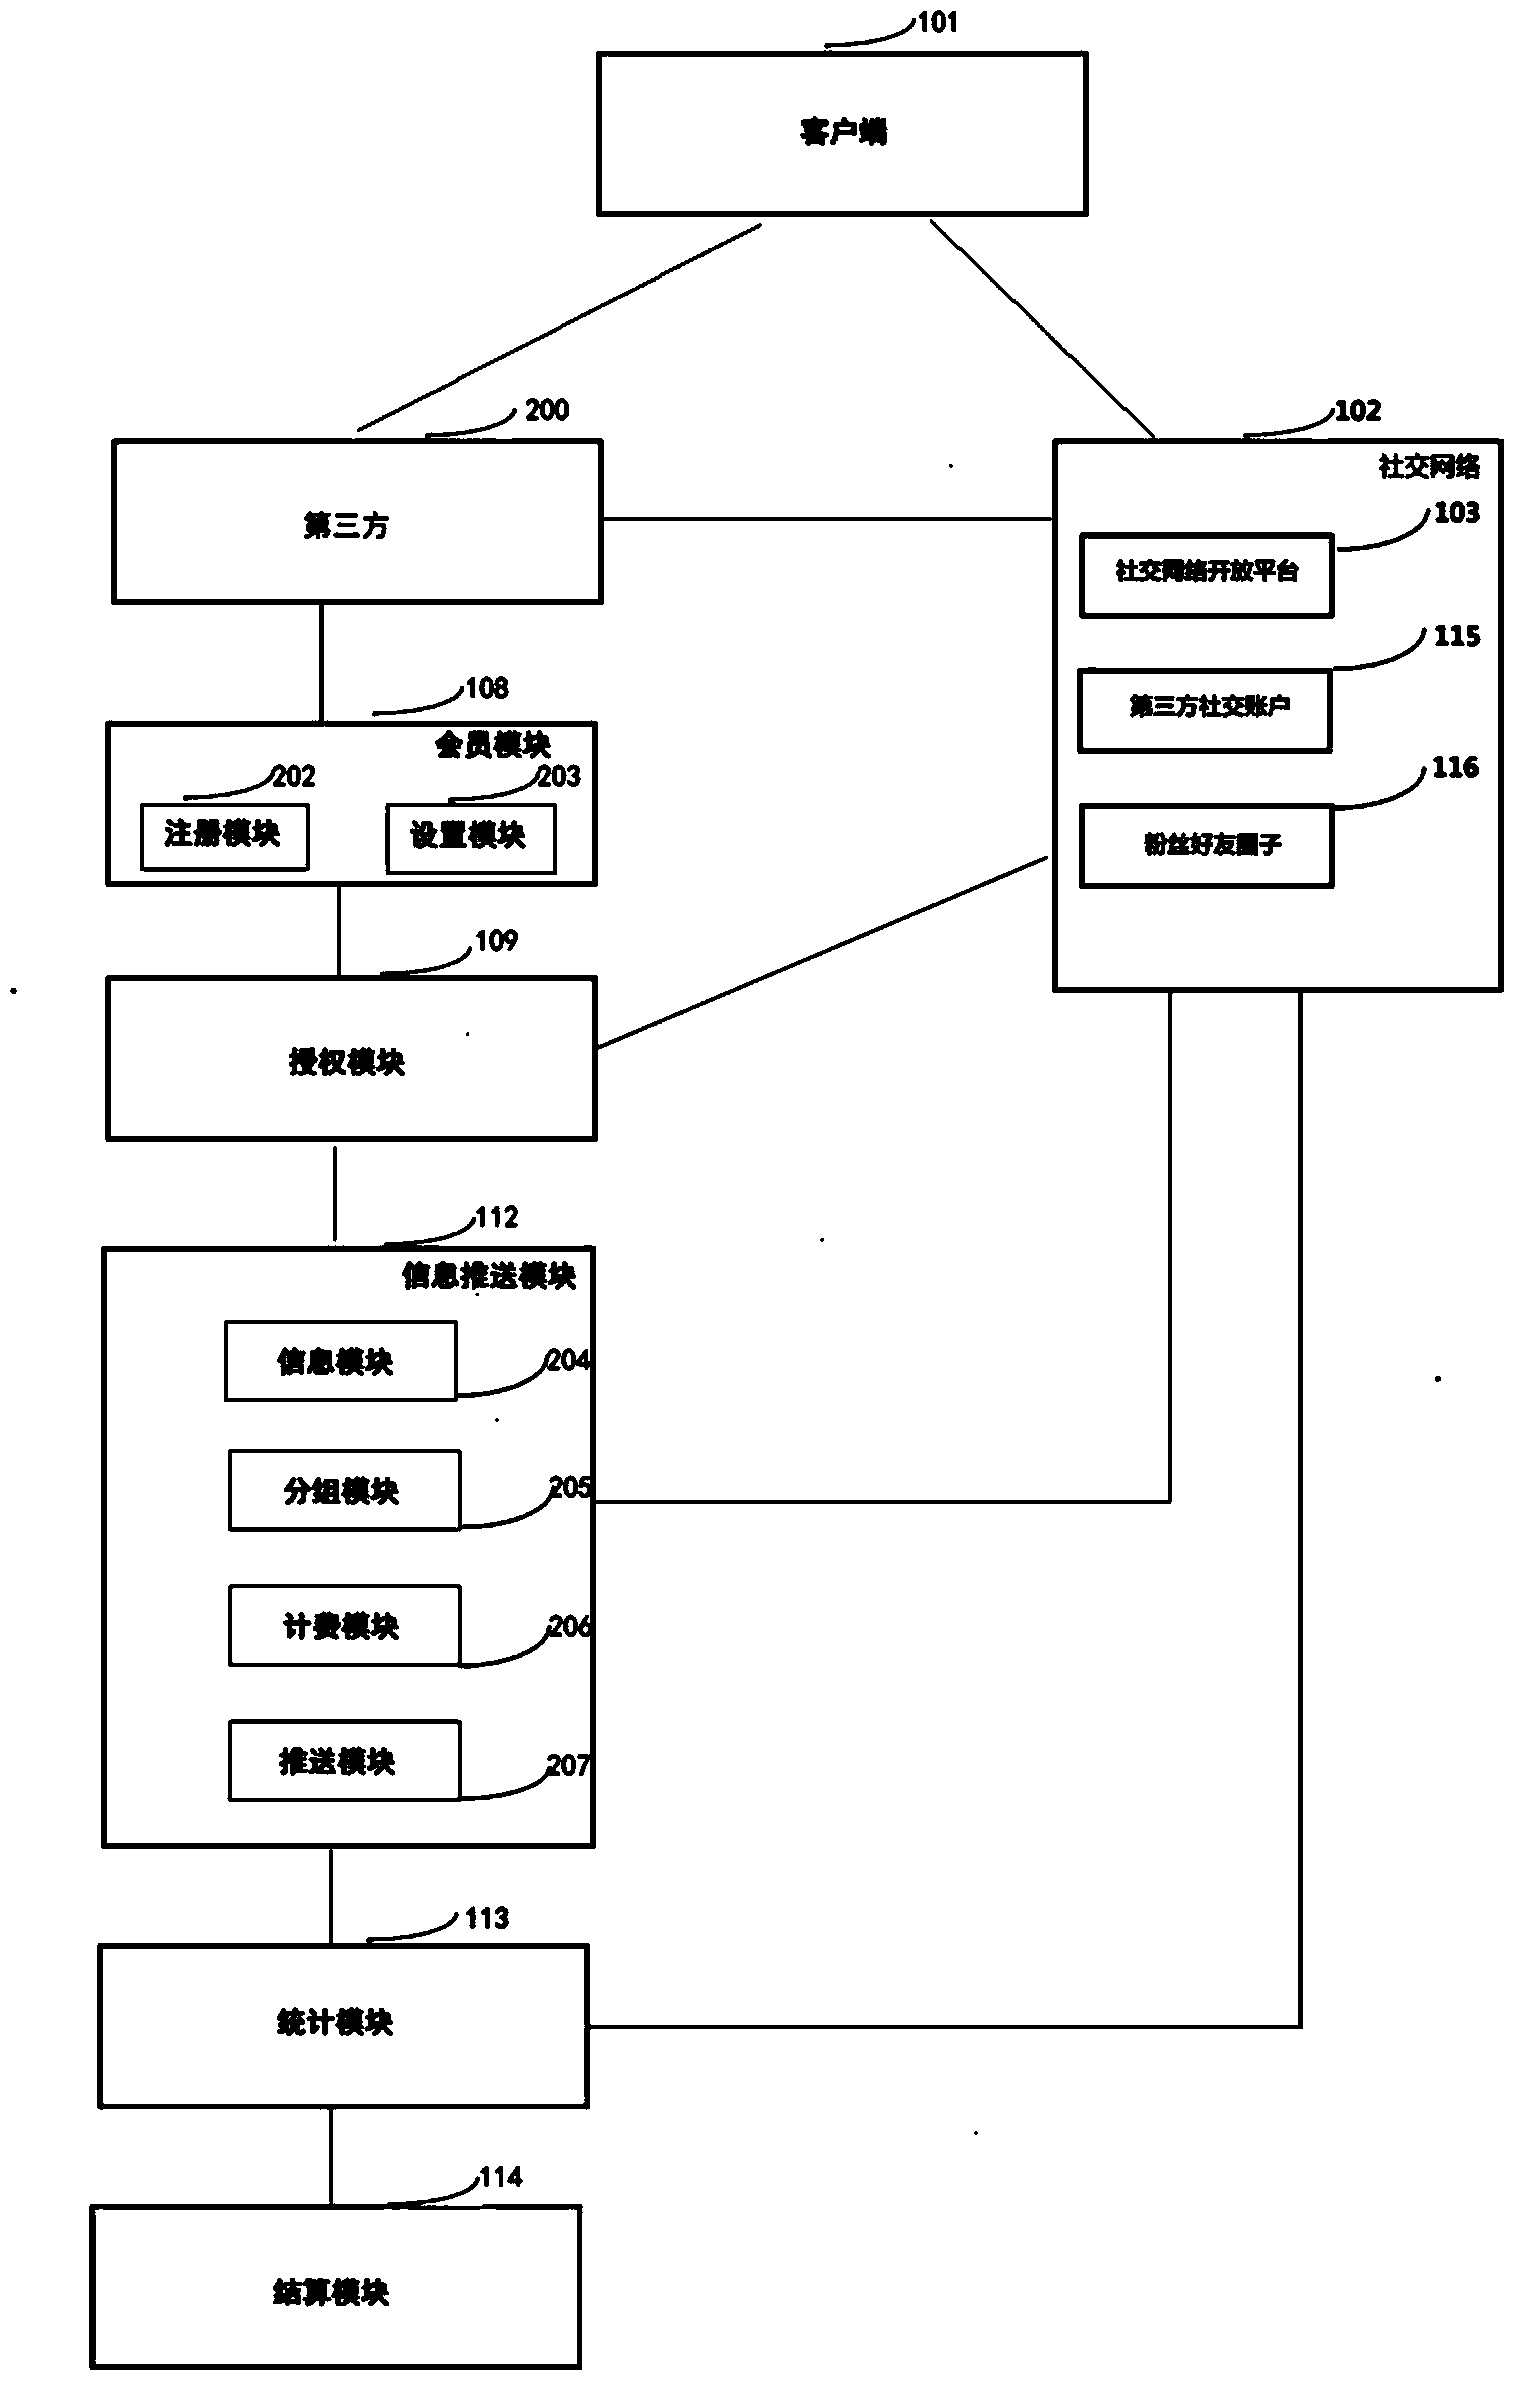 System and method for conducting information spreading through third party social account